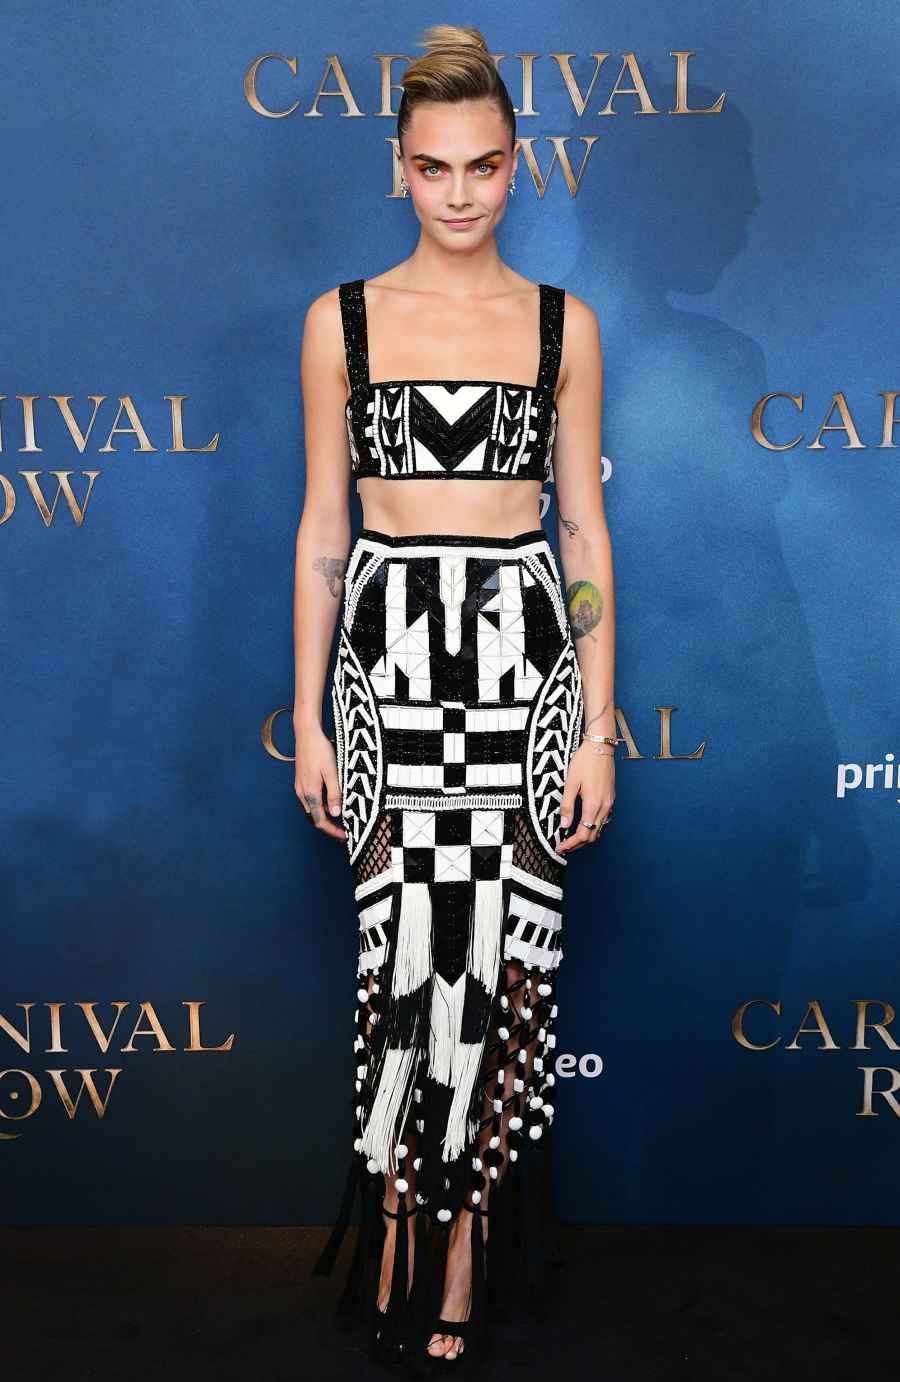 Cara Delevingne Black and White Two-Piece August 28, 2019